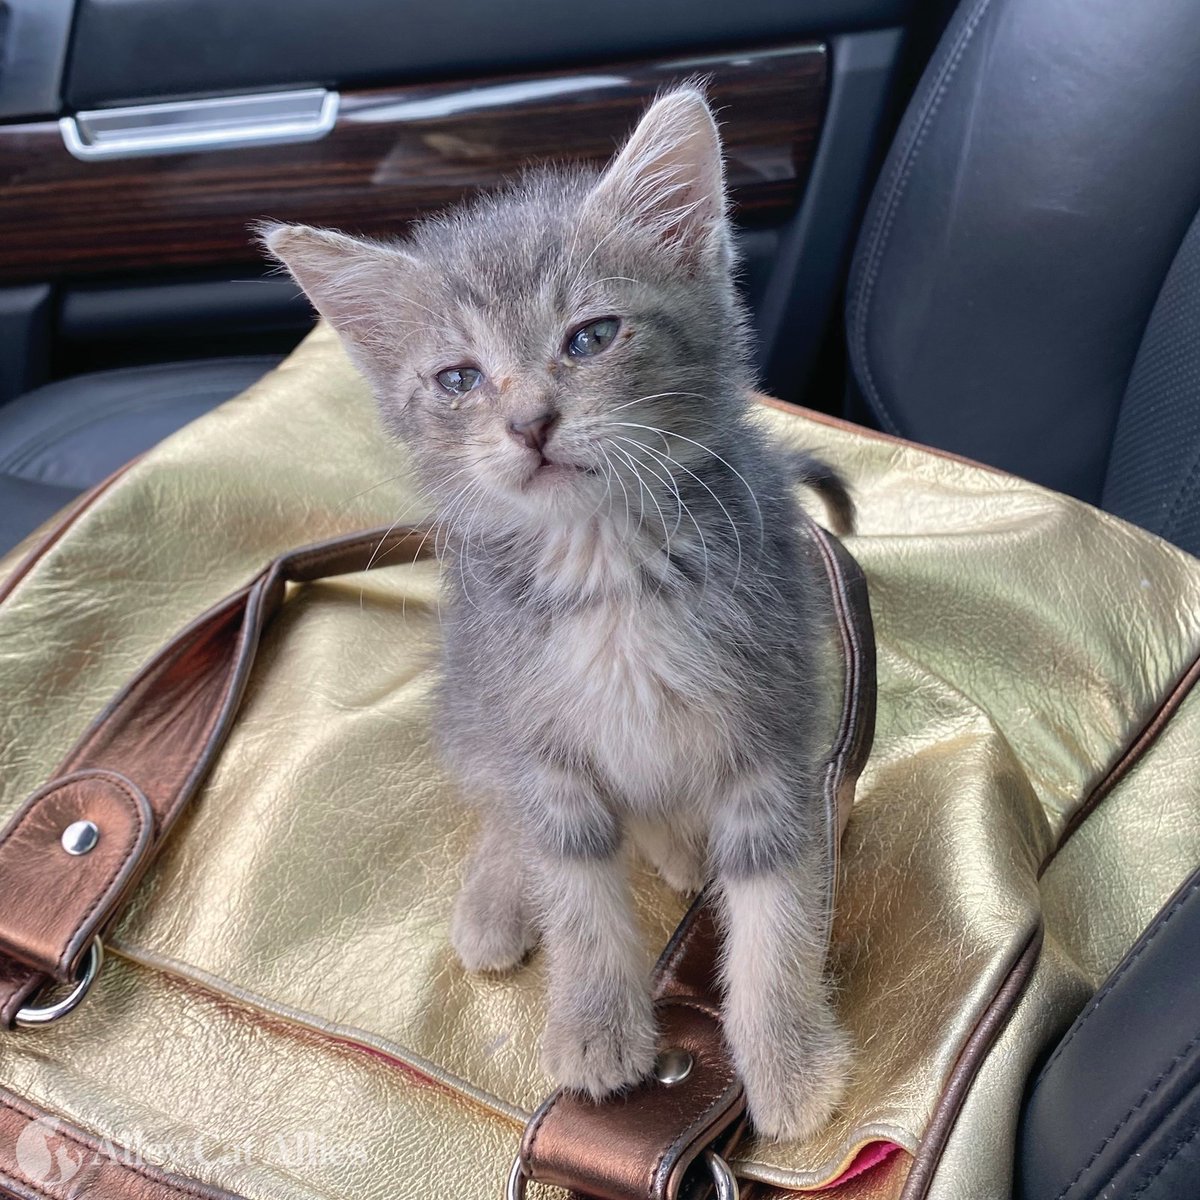 We've had a full #GlobalCatDay and just now met another kitten who needs us. We want you to meet Terra, too! 🐱🌎

Terra was unfortunately abandoned in a Maryland parking lot, but we've got her and we're ensuring she receives critical care--all thanks to our supporters like you!